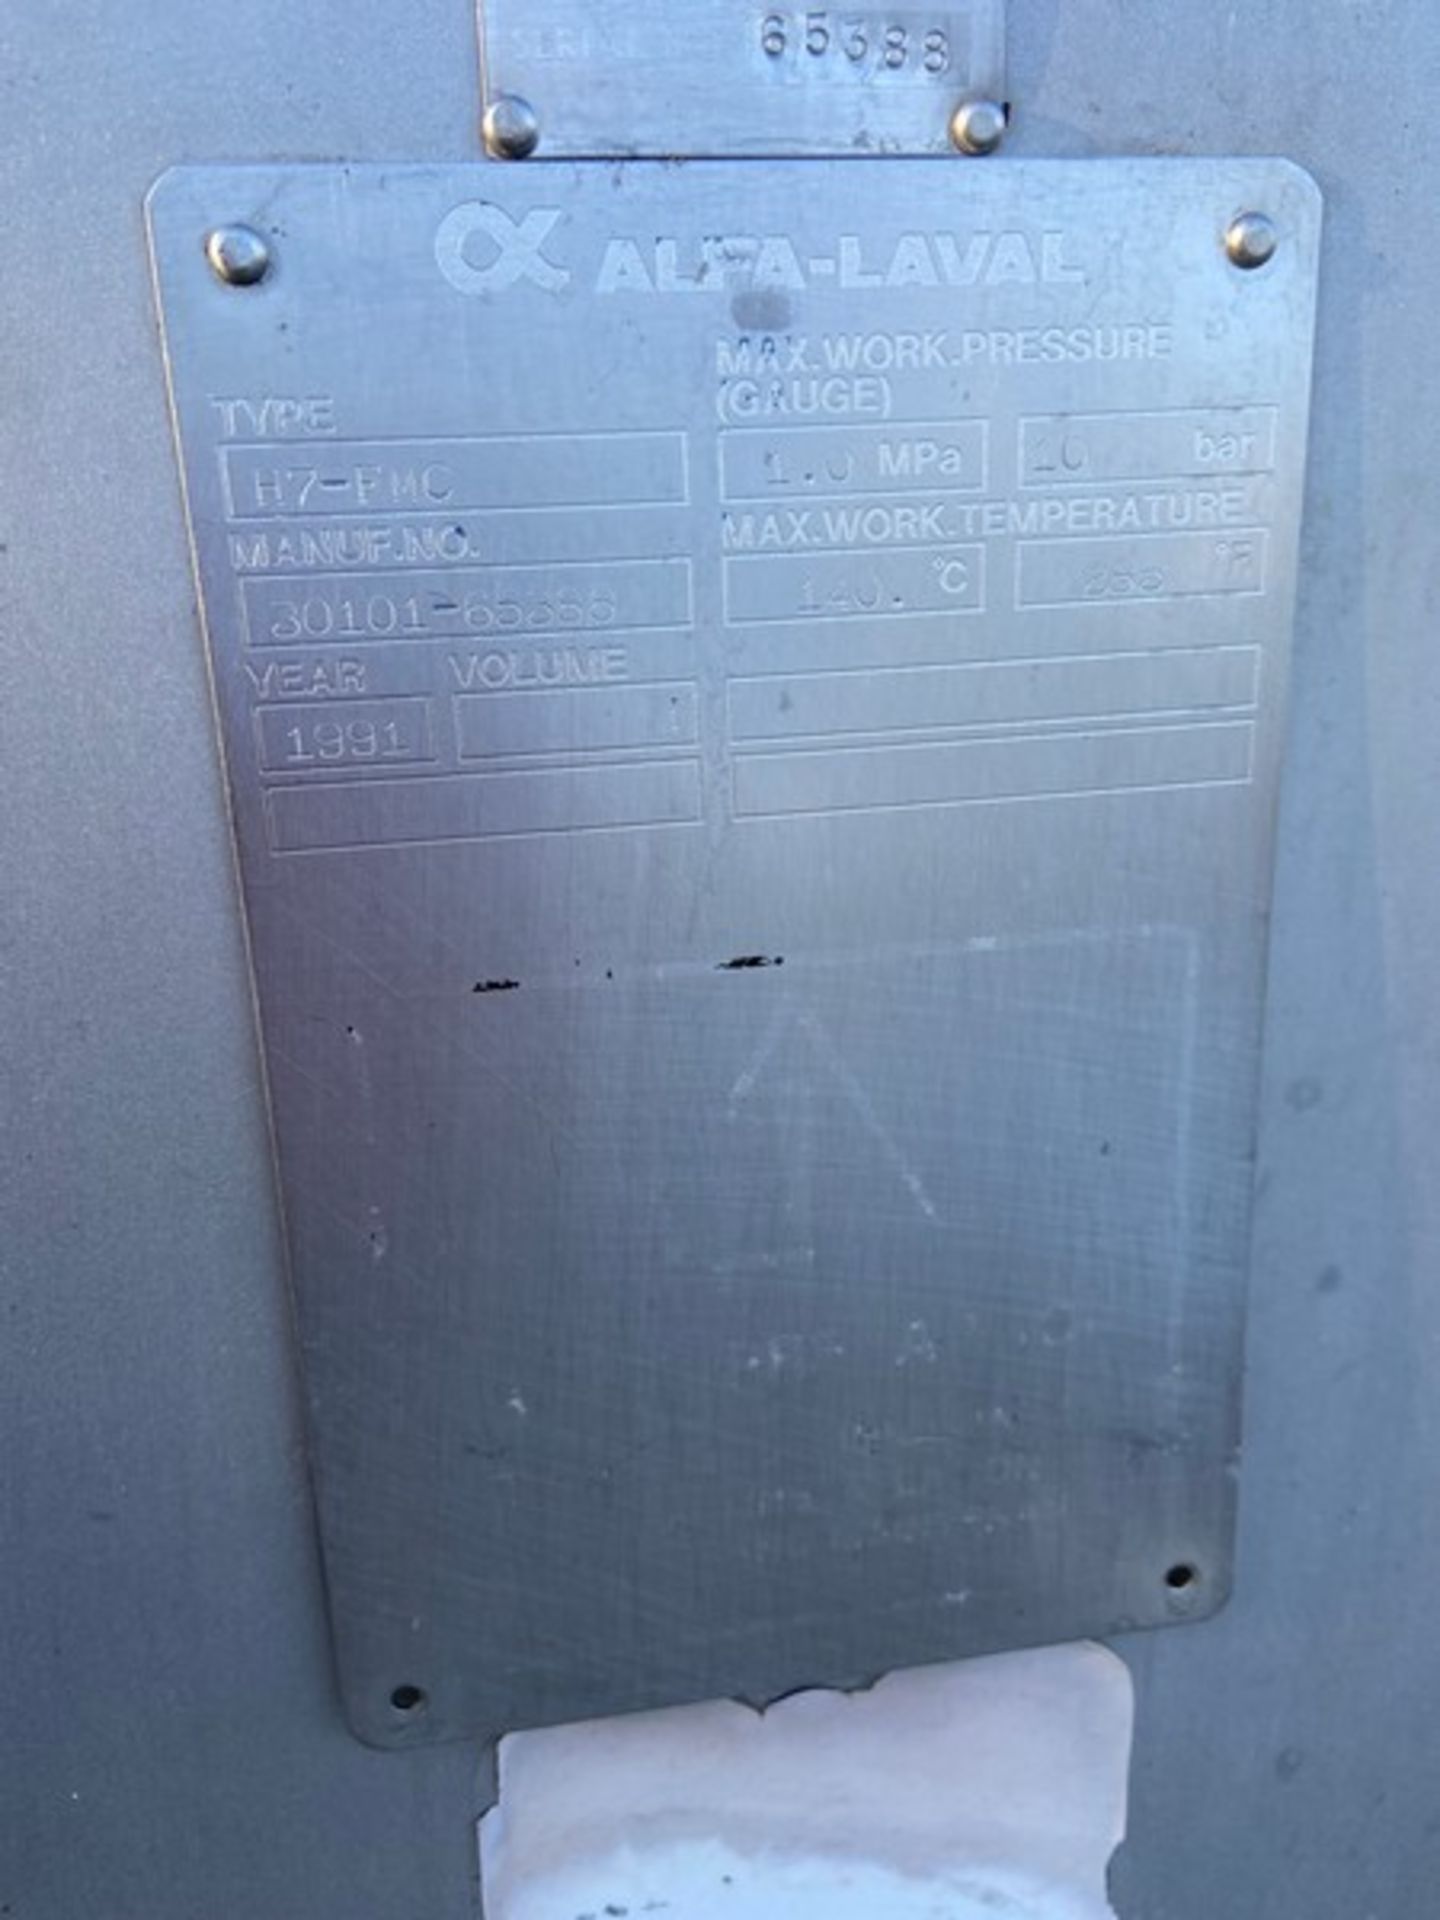 Alfa-Laval 1-Section Plate Press Heat Exchanger,-Type H7-FMC, Manuf. No.: 30101-65388, Max. Work - Image 5 of 6